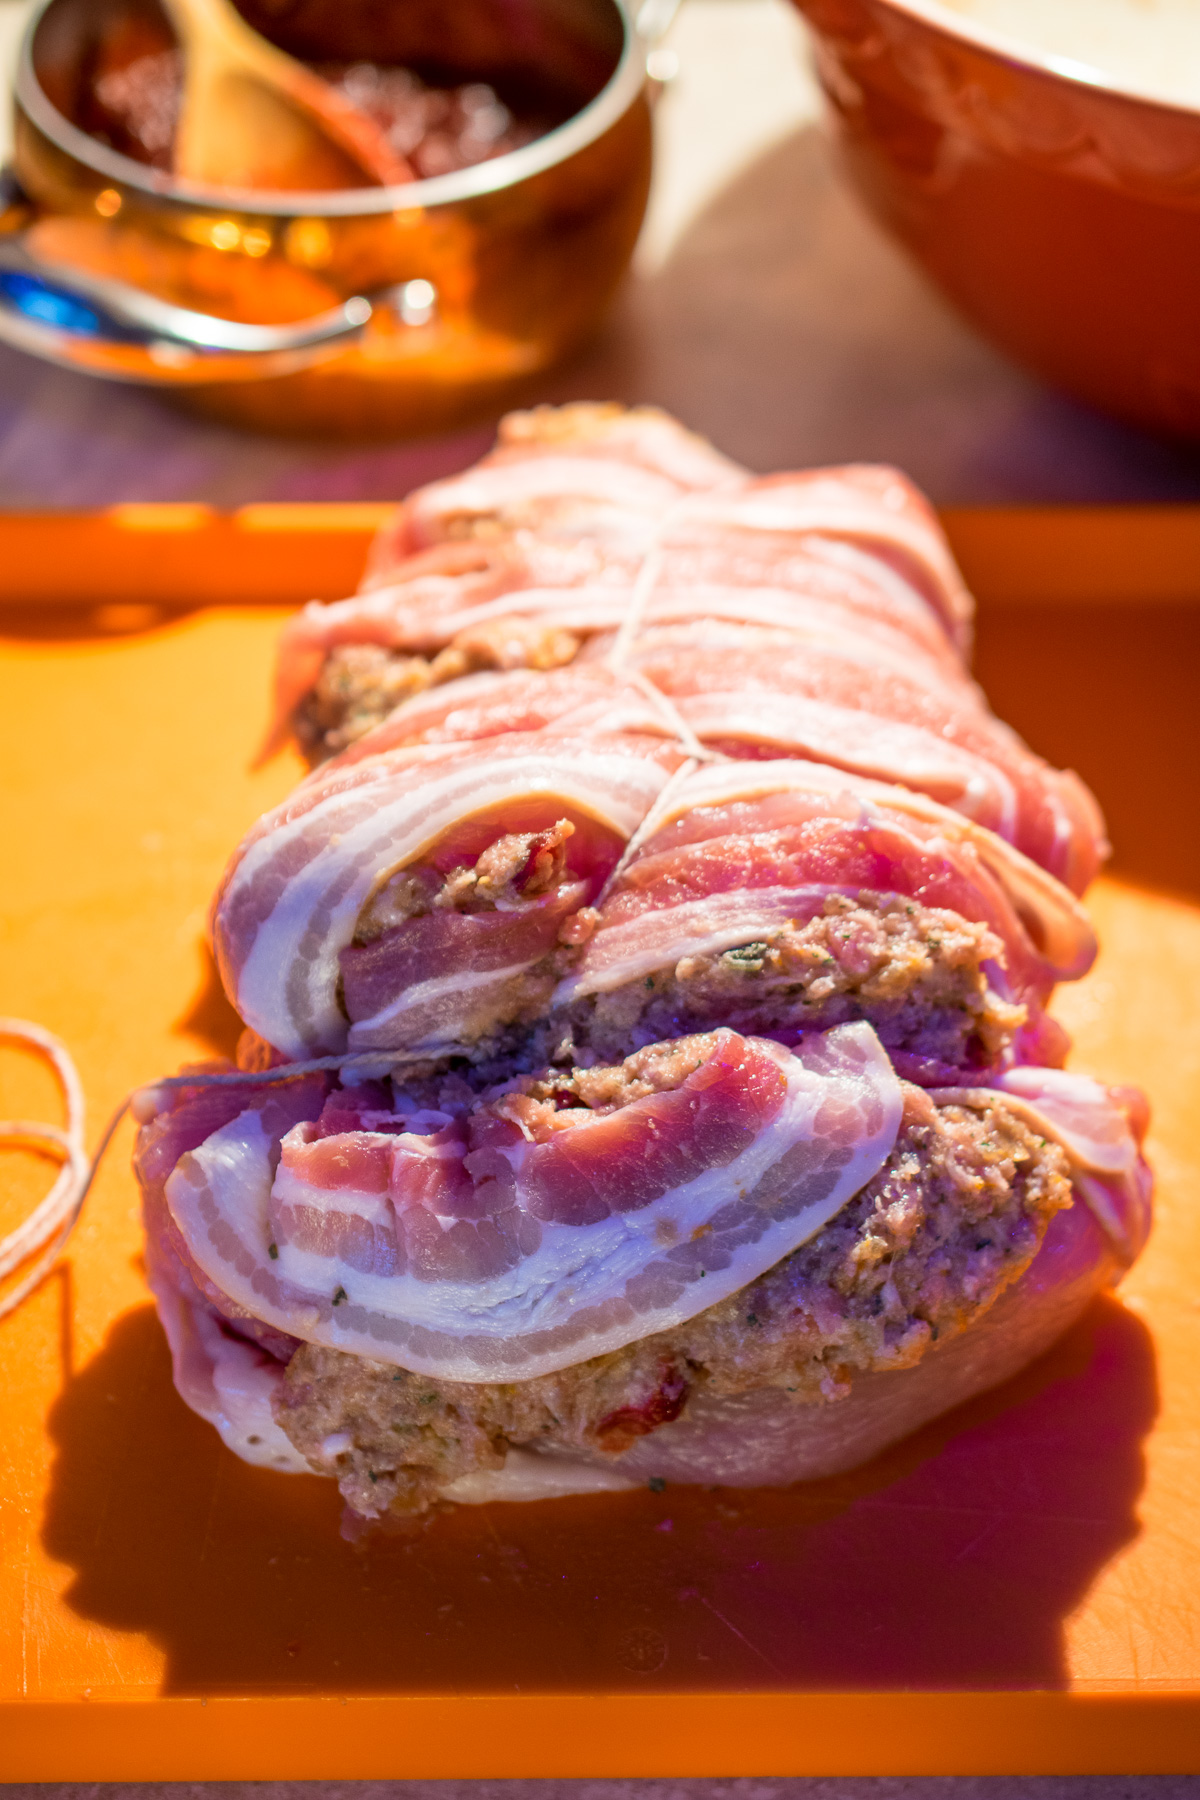 Turkey breast stuffed with a sausagemeat and clementine stuffing